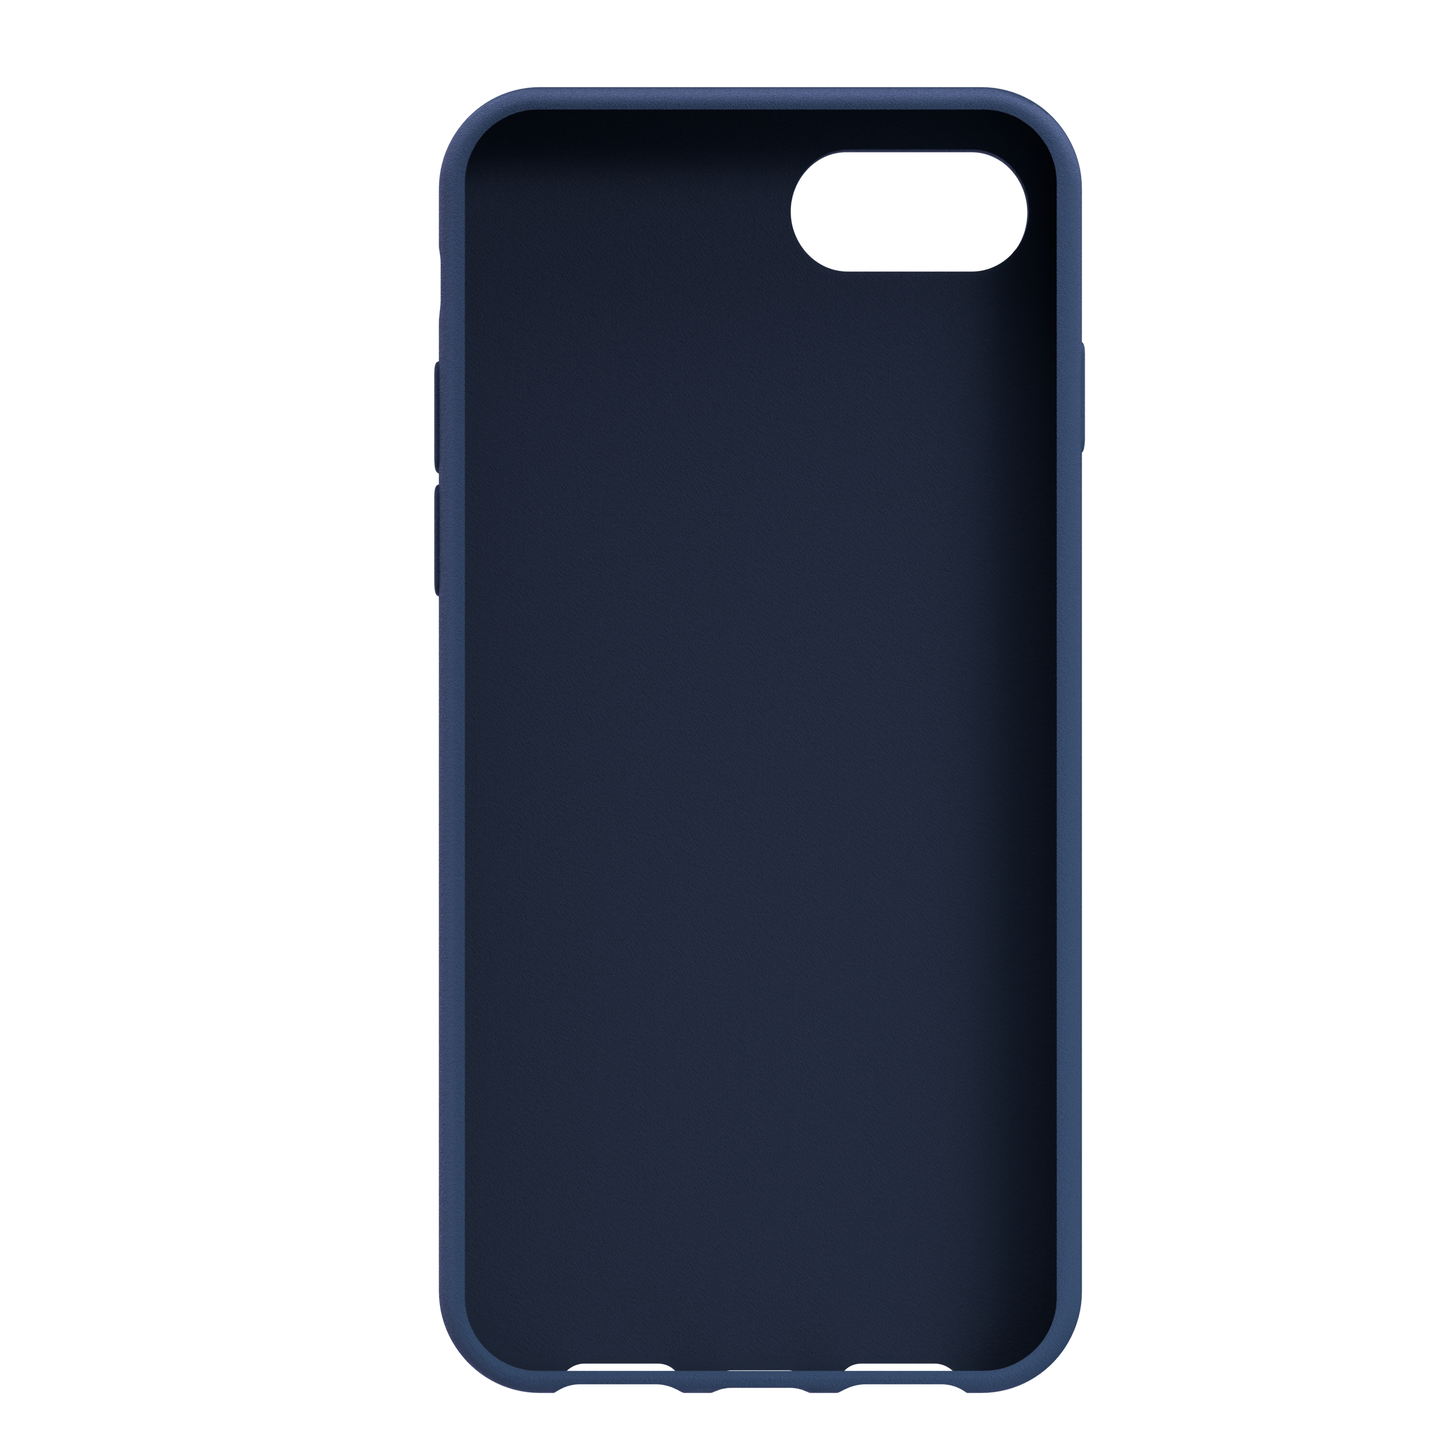 NEXT.ONE Silicone case blue for iPhone 6/7/8/SE